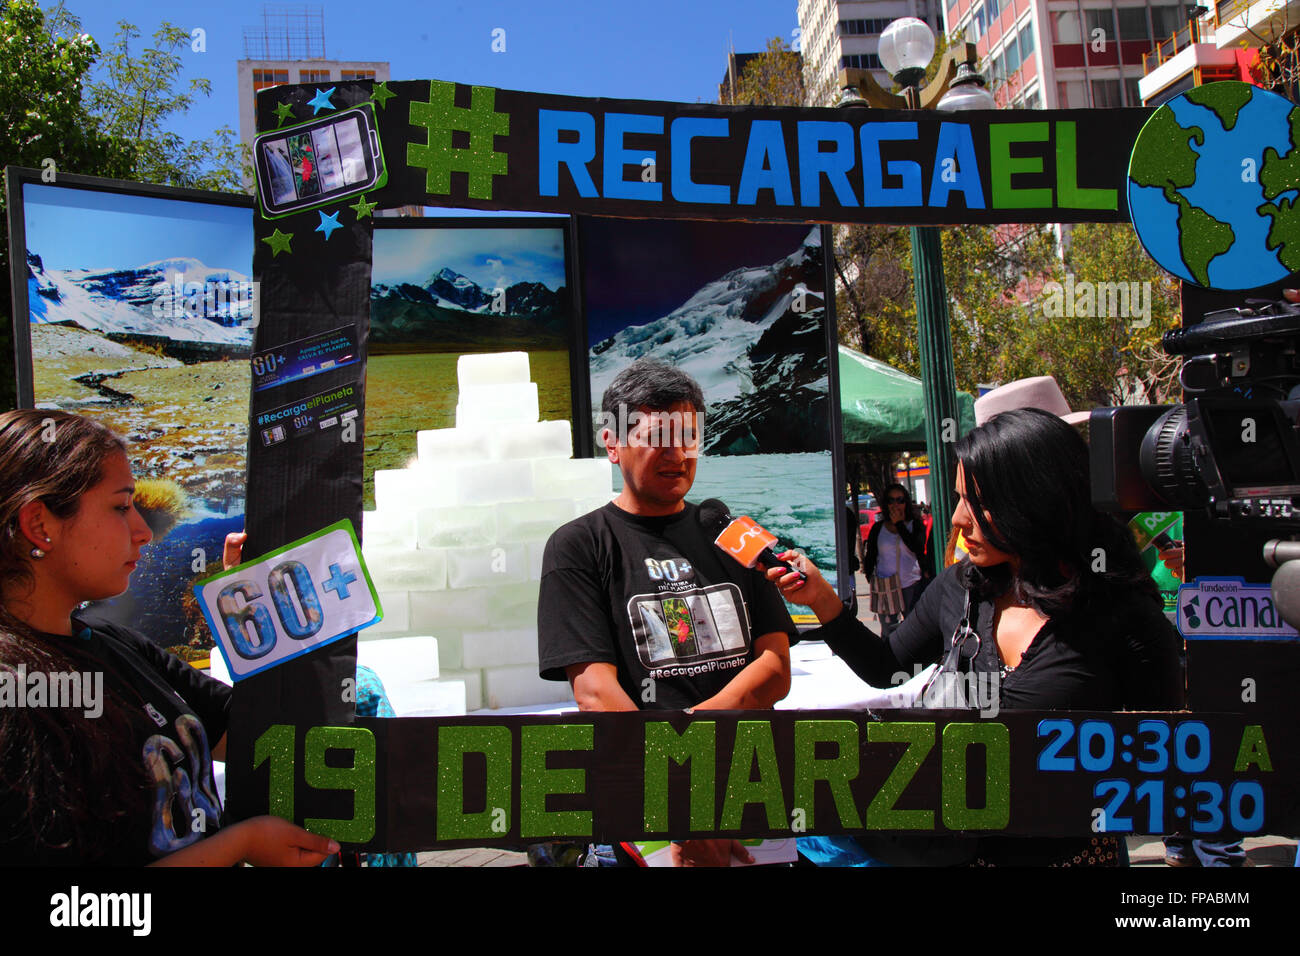 La Paz, Bolivia, 18th March 2016. An activist talks about Earth Hour (which takes place tomorrow) to a local TV press reporter at an event organised by the La Paz City Government. Behind him blocks of ice melt in front of photos of Bolivia's mountains, a display to highlight global warming (glaciers in Bolivia and the Andes are some of the fastest receding on the planet). The slogan reads 'Recarga el Planeta' / 'Recharge the Planet'. Credit: James Brunker / Alamy Live News Stock Photo